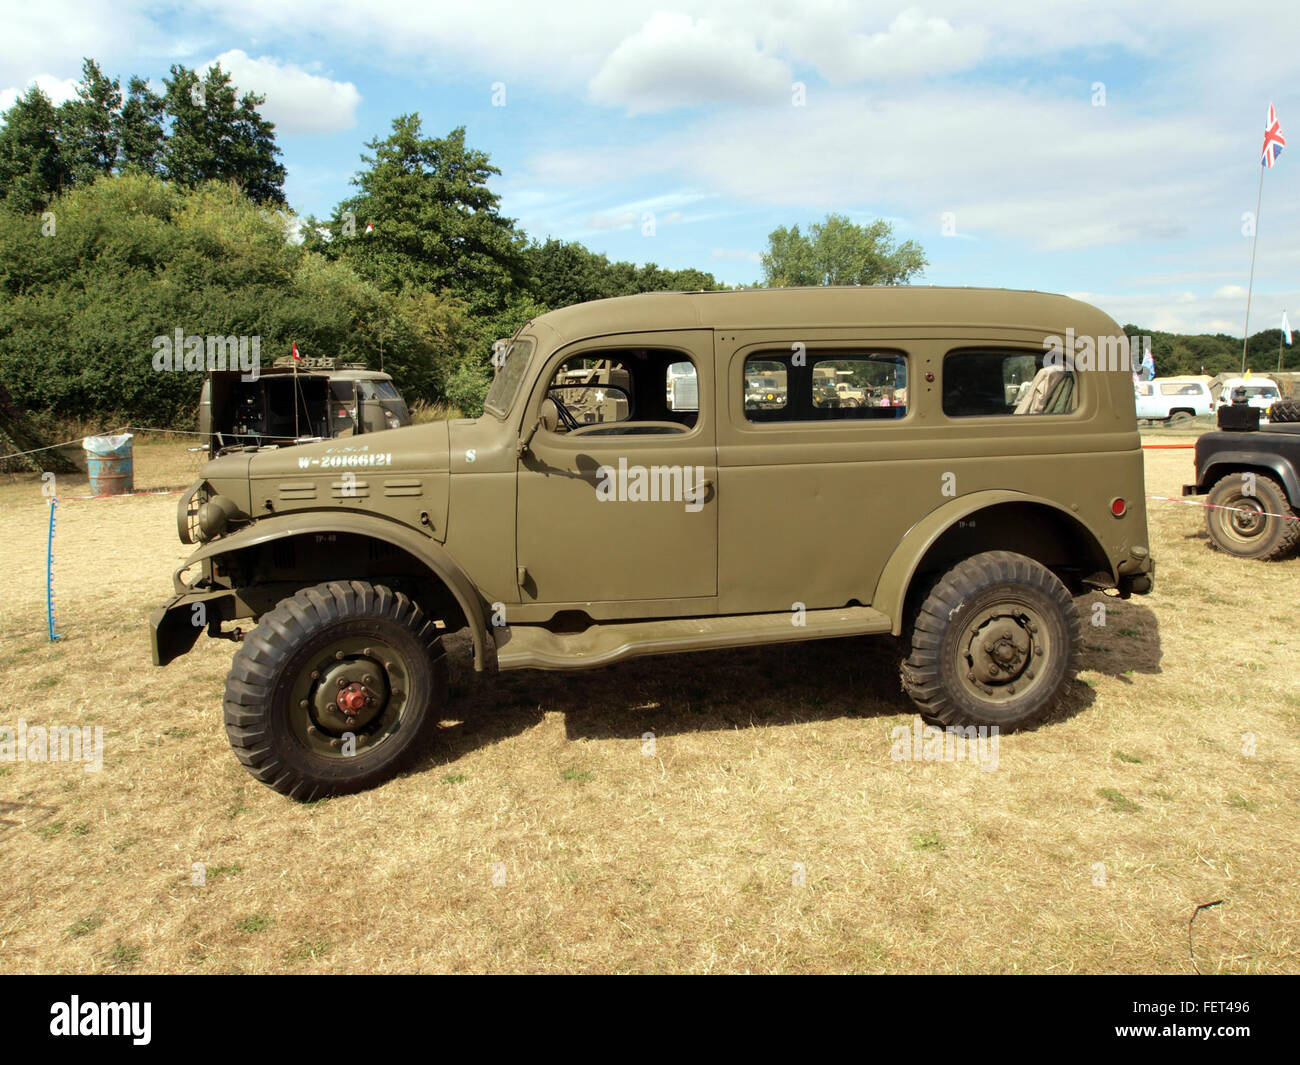 Dodge WC 53 Carryall W-20166121 S pic2 Stockfoto